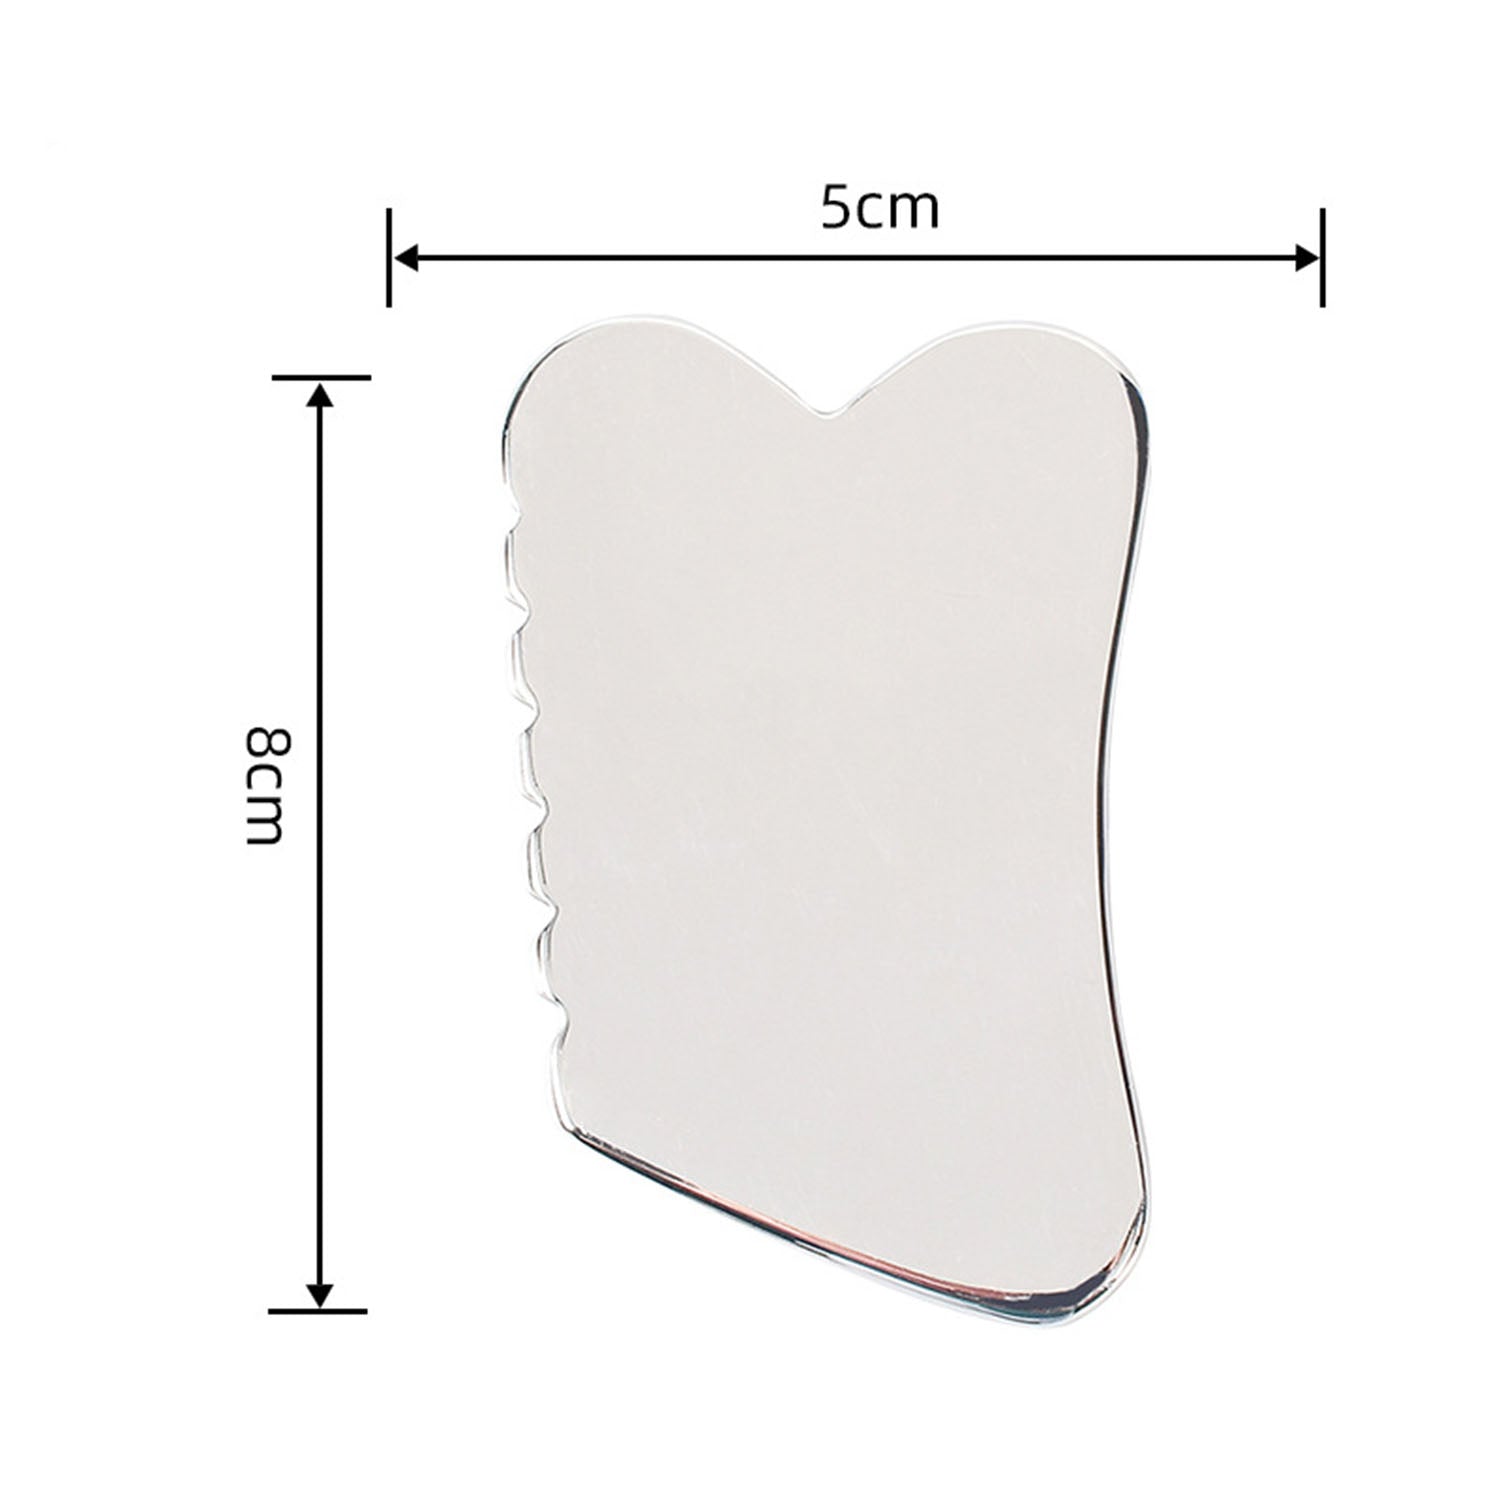 High-Performance Gua Sha, Stainless Steel GuaSha Tool Aoxily CHN, Inc. All Rights Reserved.